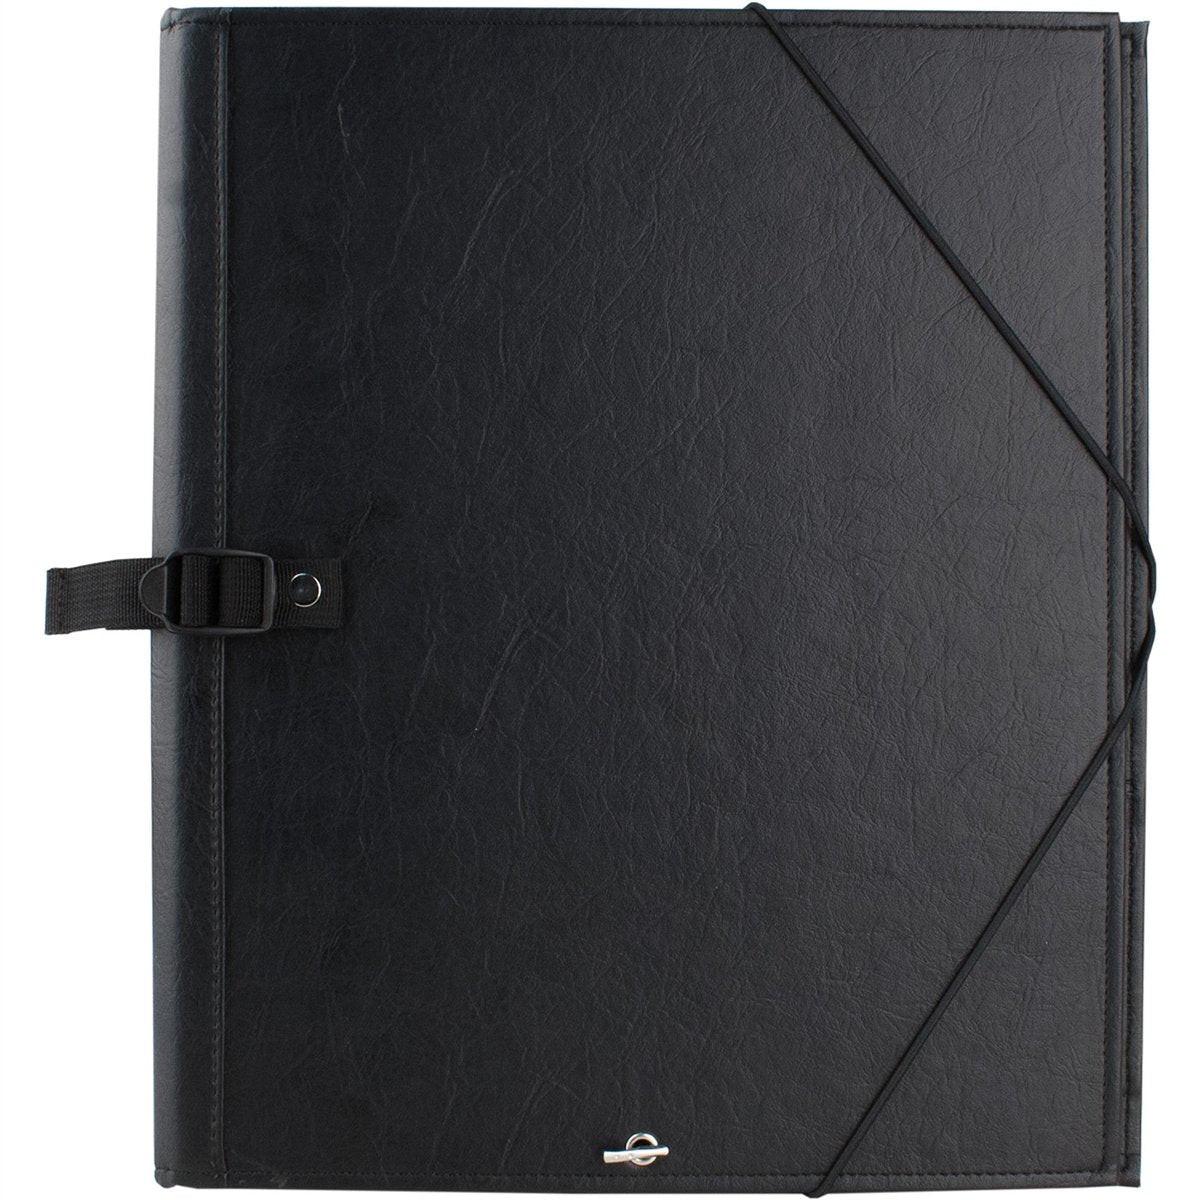 Protec - Deluxe Choral Folder with Elastic String Dividers &amp; Adjustable Hand Strap-Accessories-Protec-Music Elements